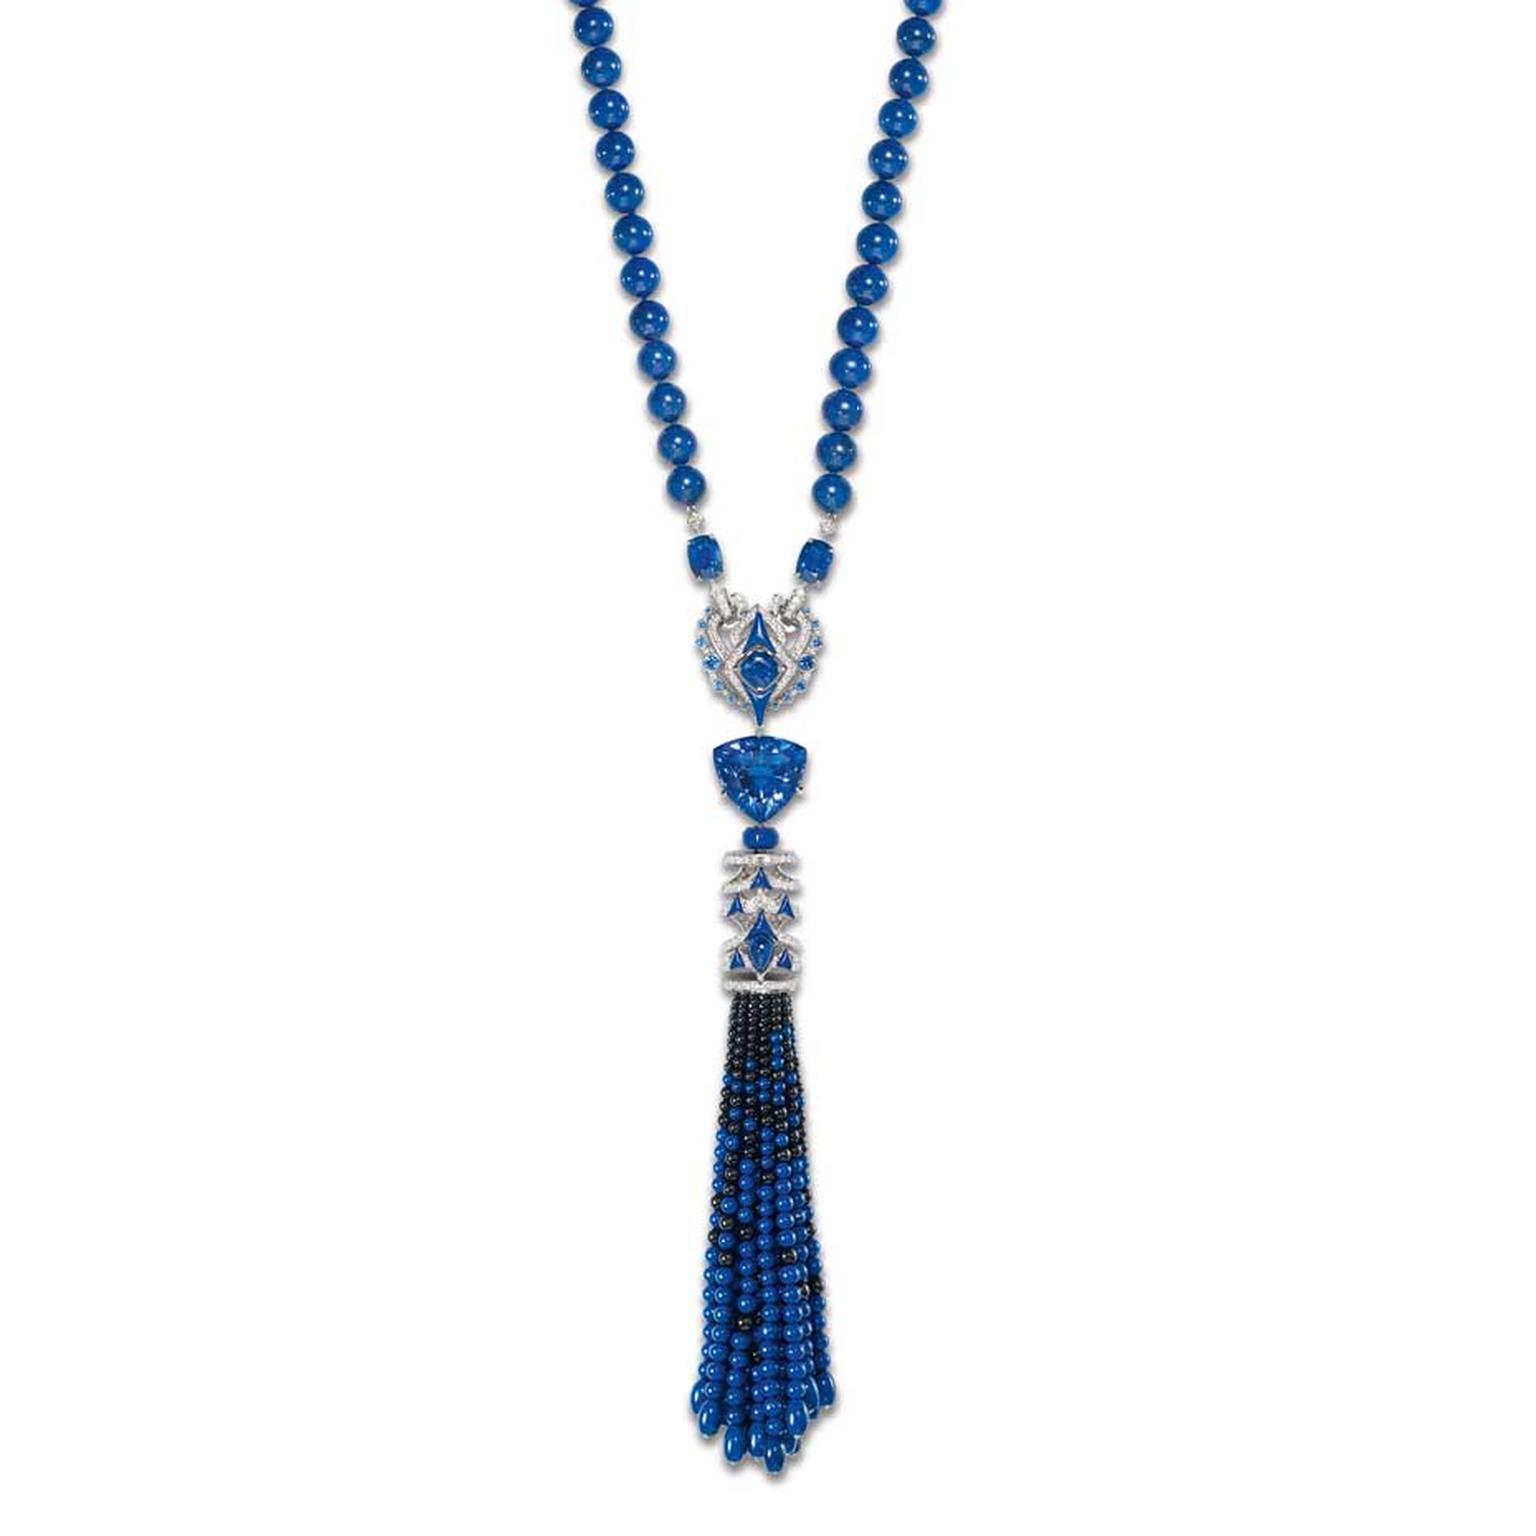 Chaumet Lumières d'Eau collection diamond necklace embellished with a pompom of graded lapis lazuli and black spinels.